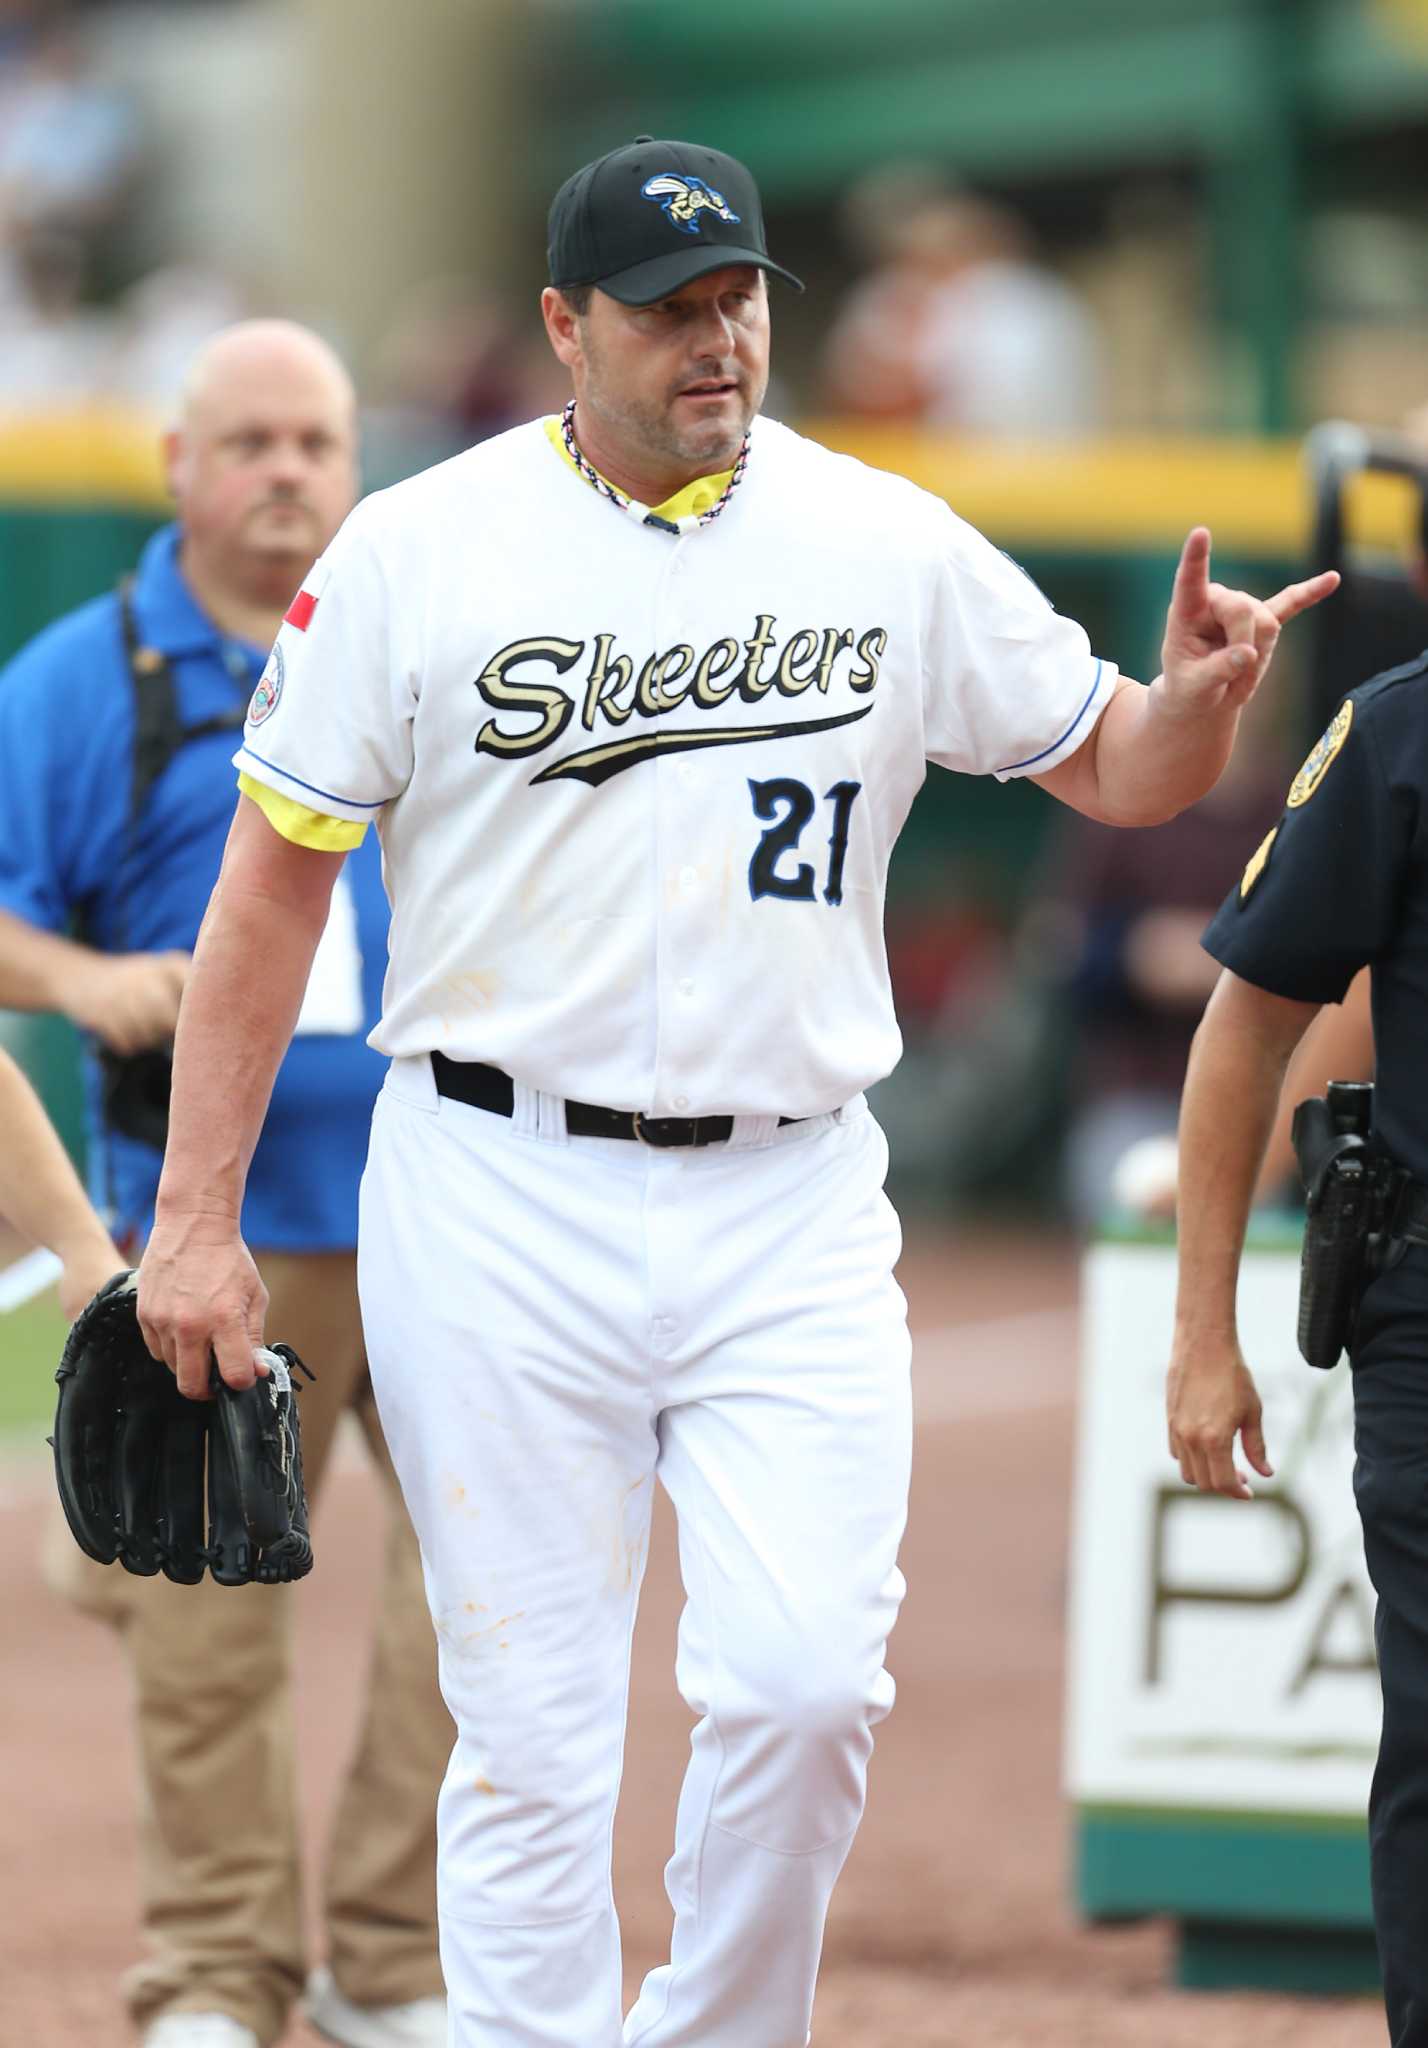 Skeeters' Gaetti embraces role of players' manager